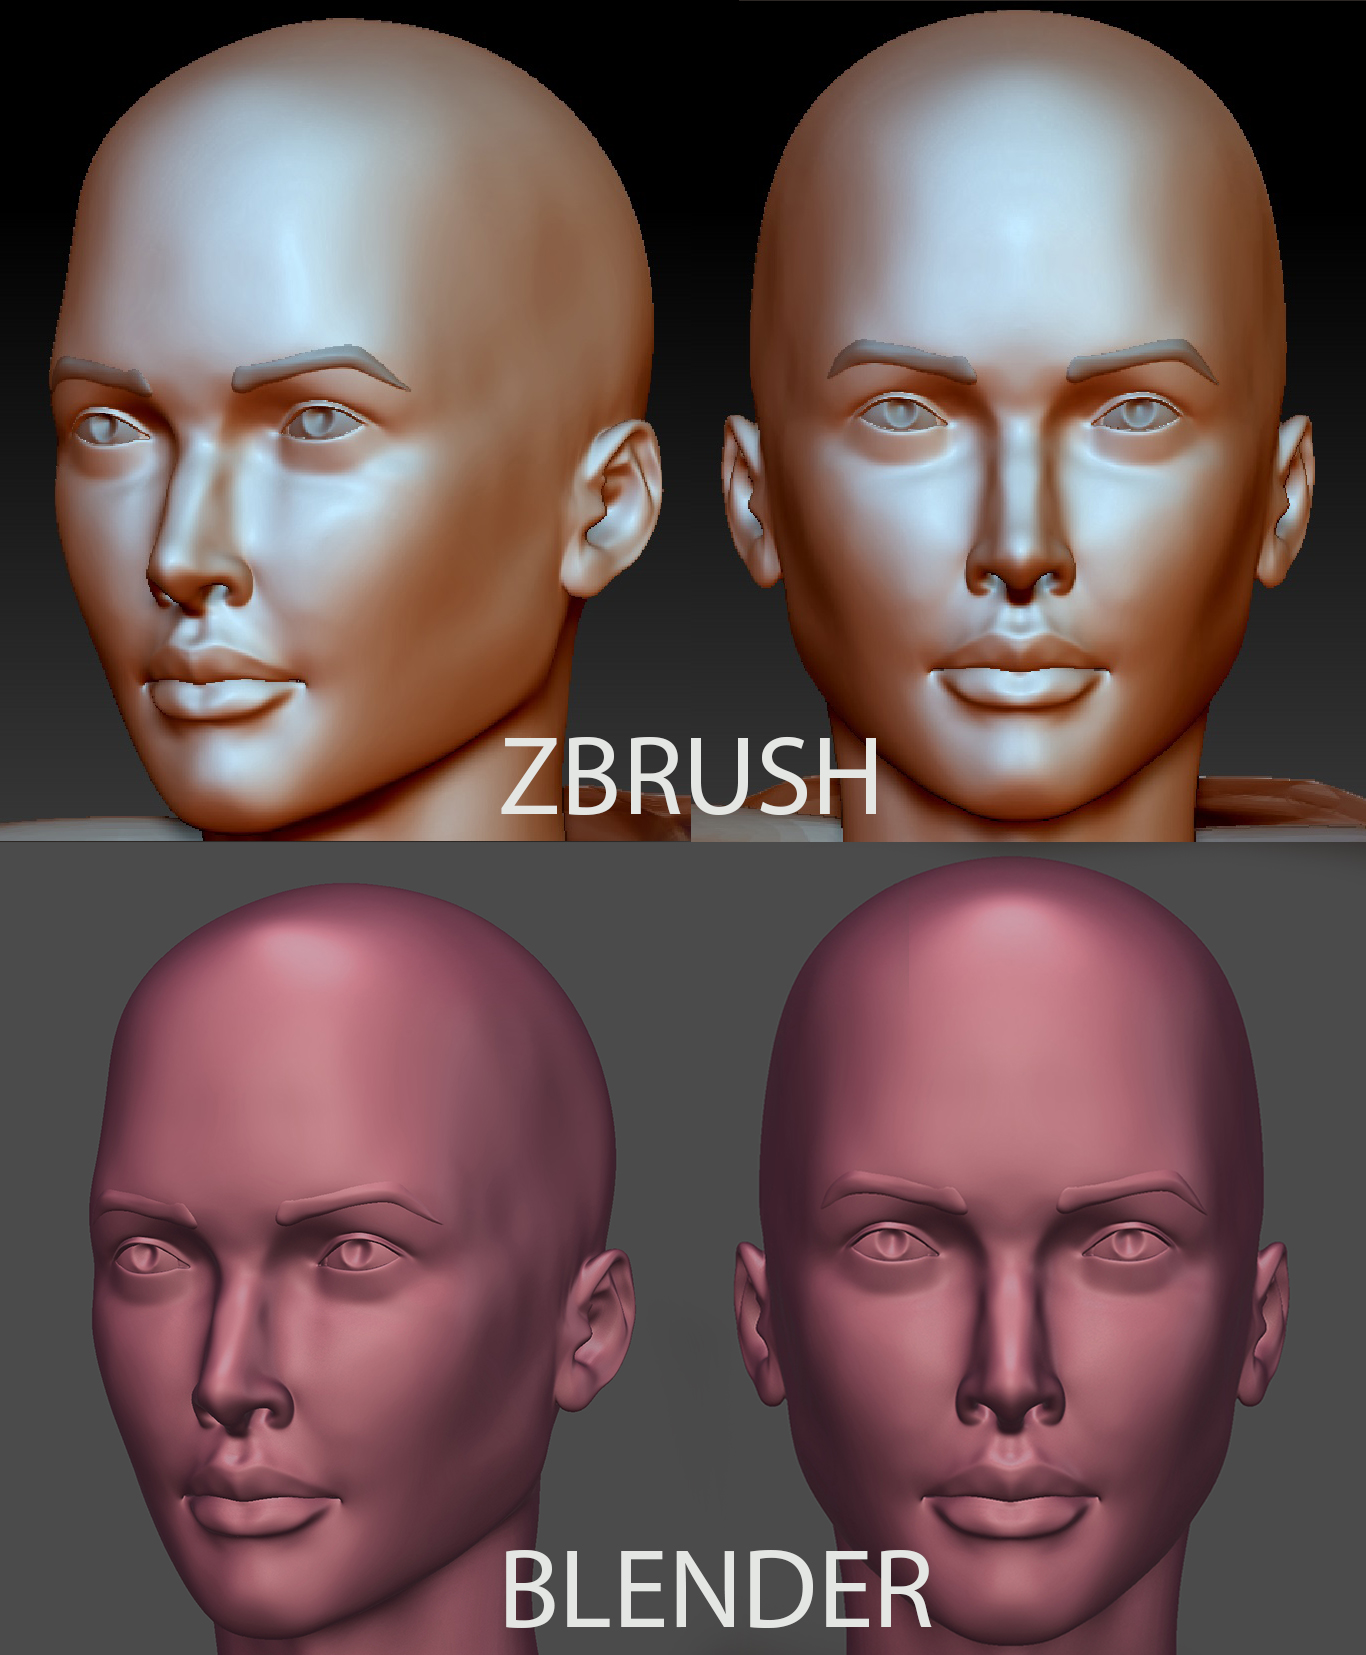 zbrush cant see other side normals